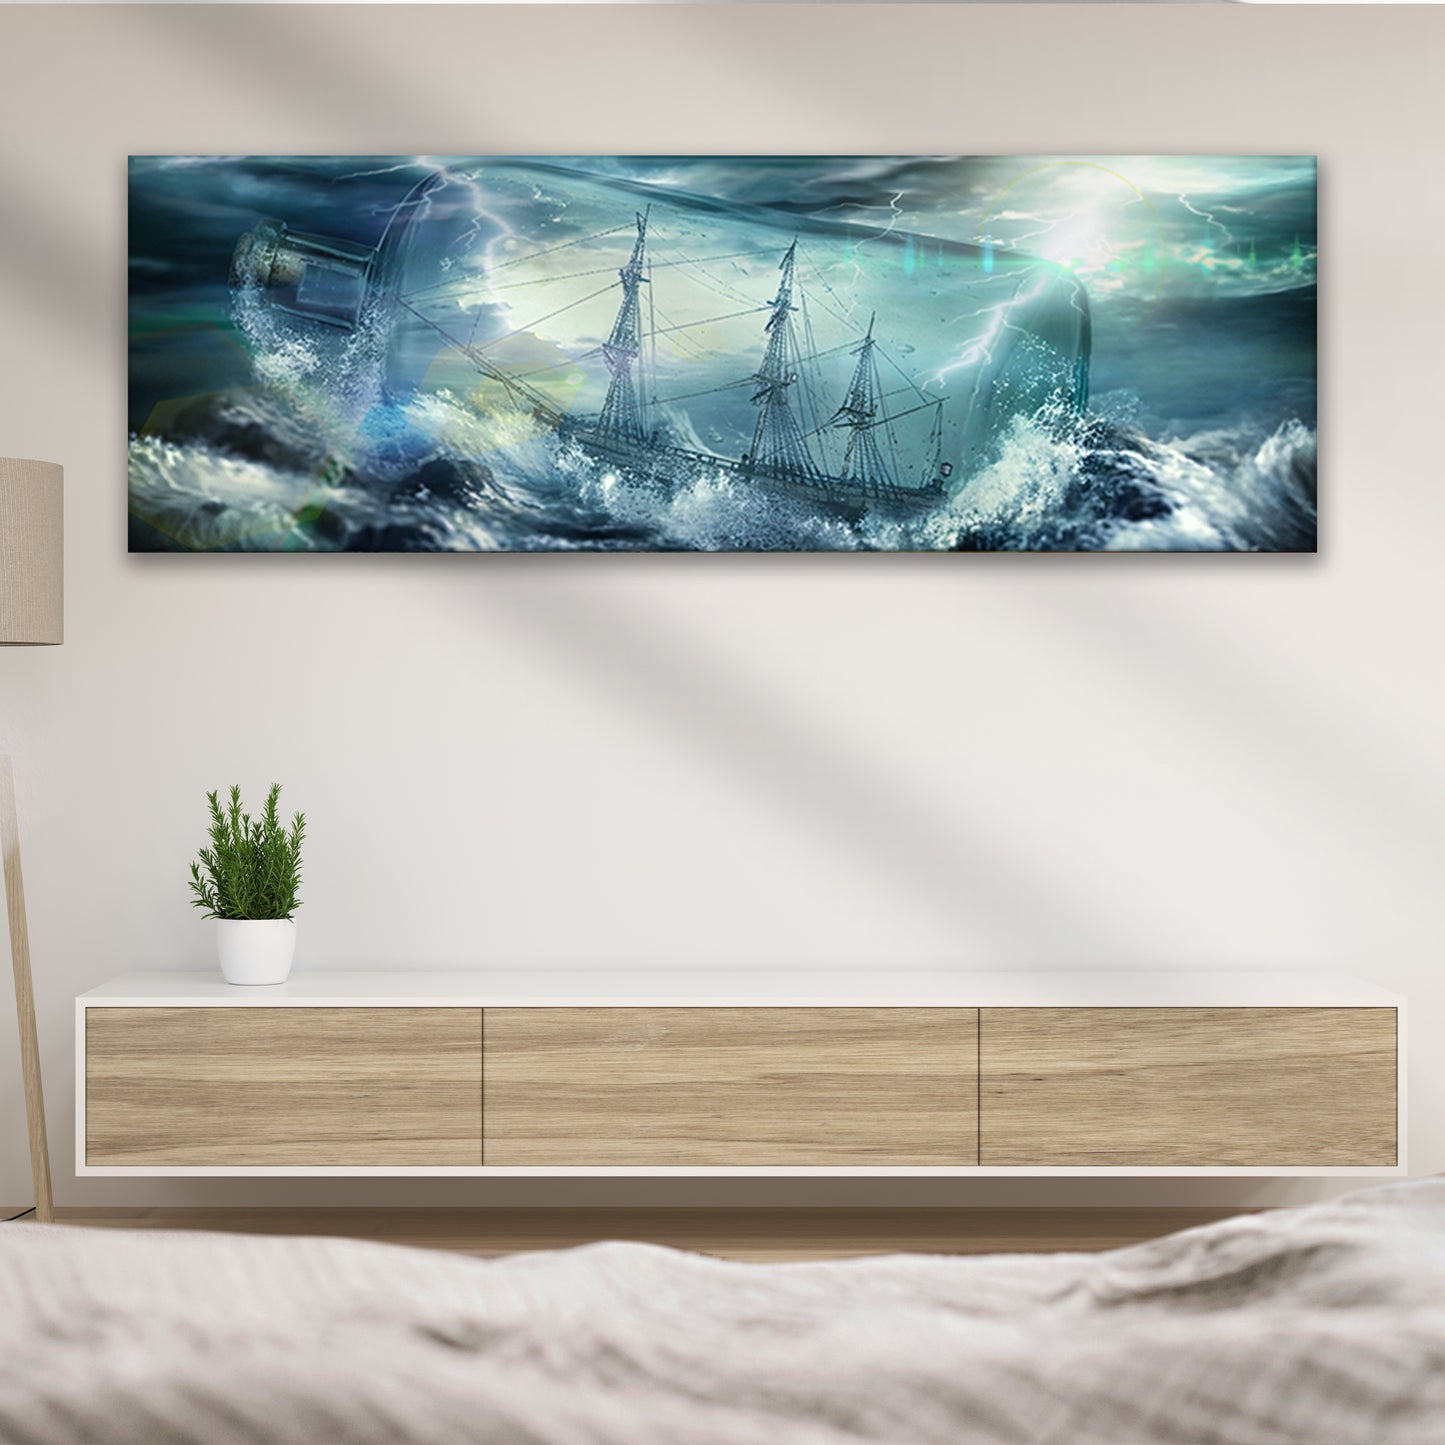 Pirate Ship In A Bottle Canvas Wall Art Style 2 - Image by Tailored Canvases